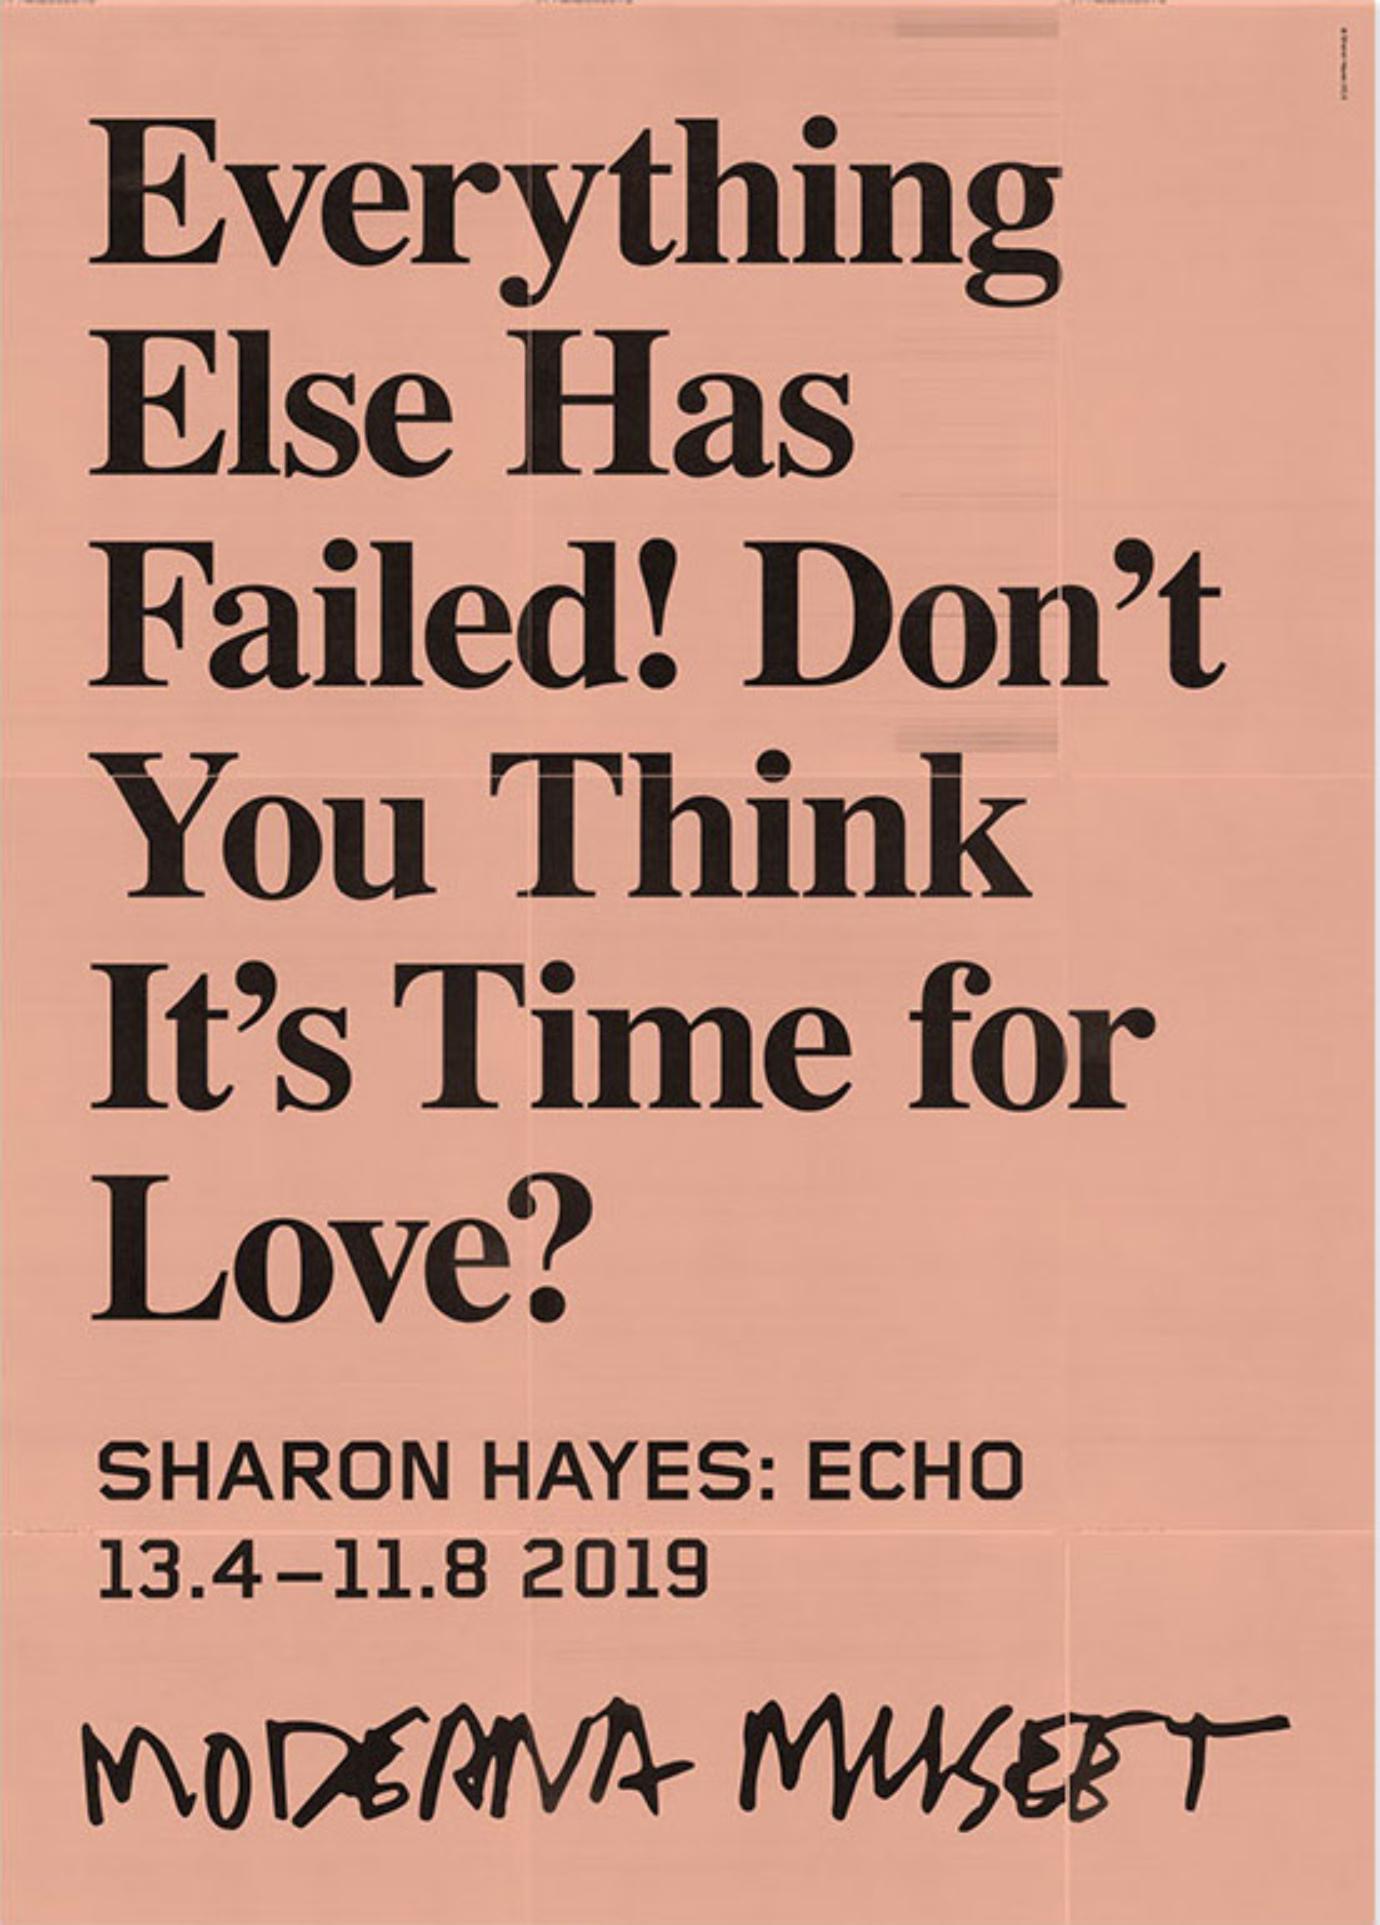 Sharon Hayes Print - Everything Else Has Failed! Don't You Think It's Time for Love? Museum Poster